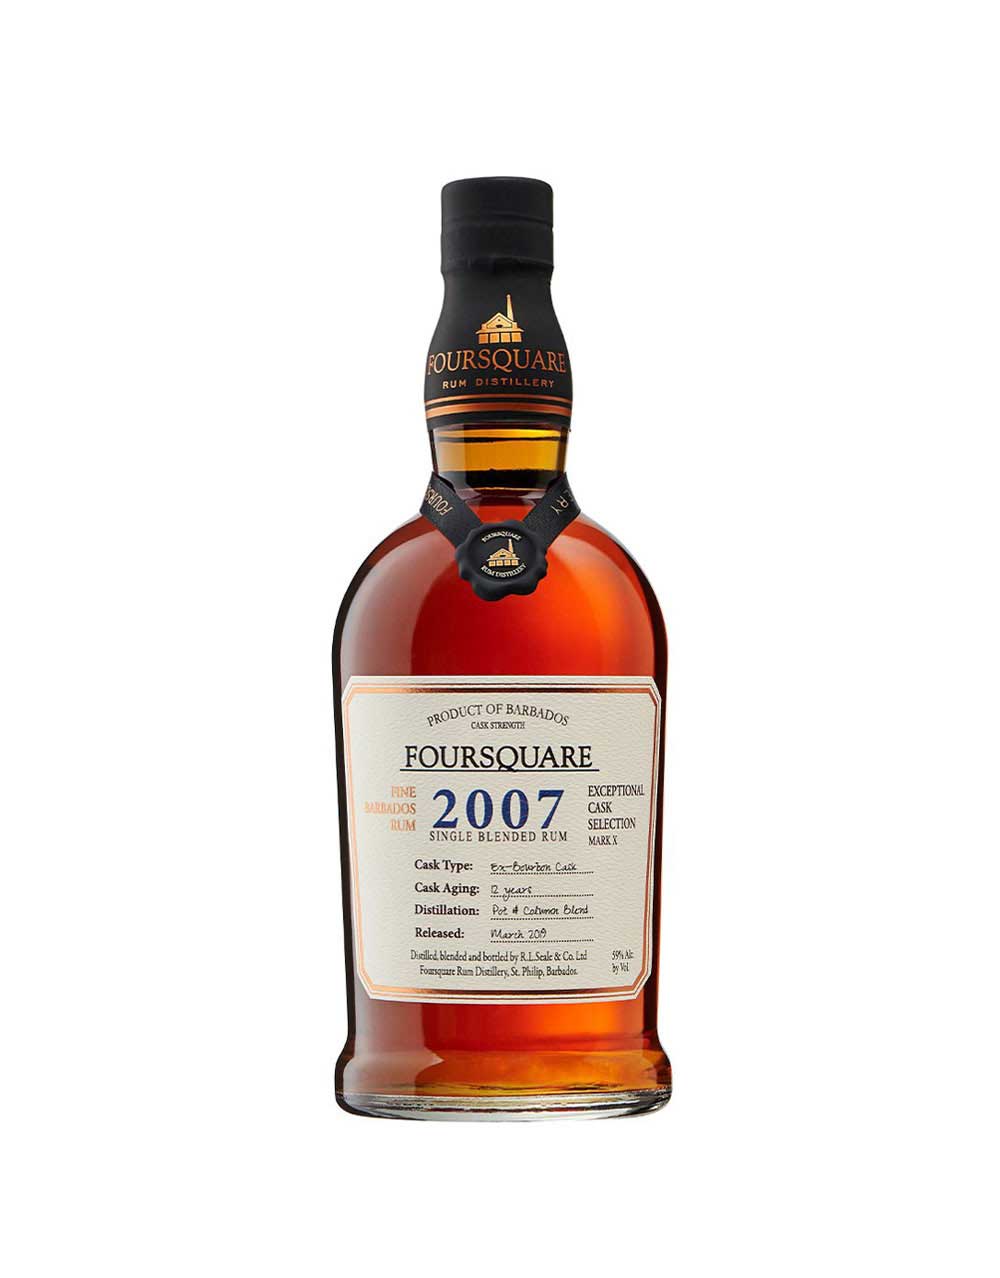 Parce 8 Year Old Straight Colombian Rum